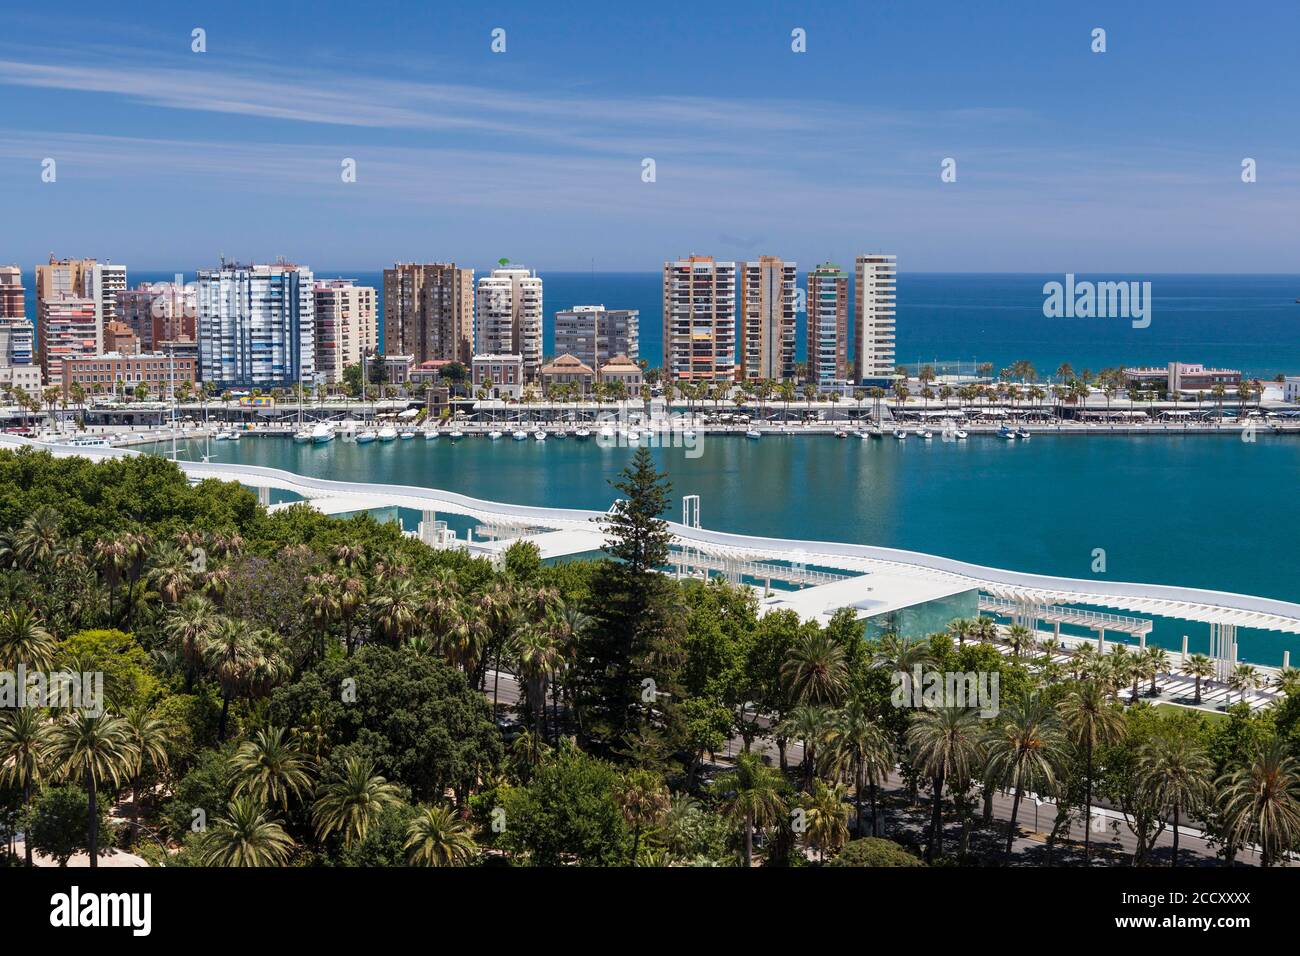 City view with seaport and parks, Malaga, Spain Stock Photo